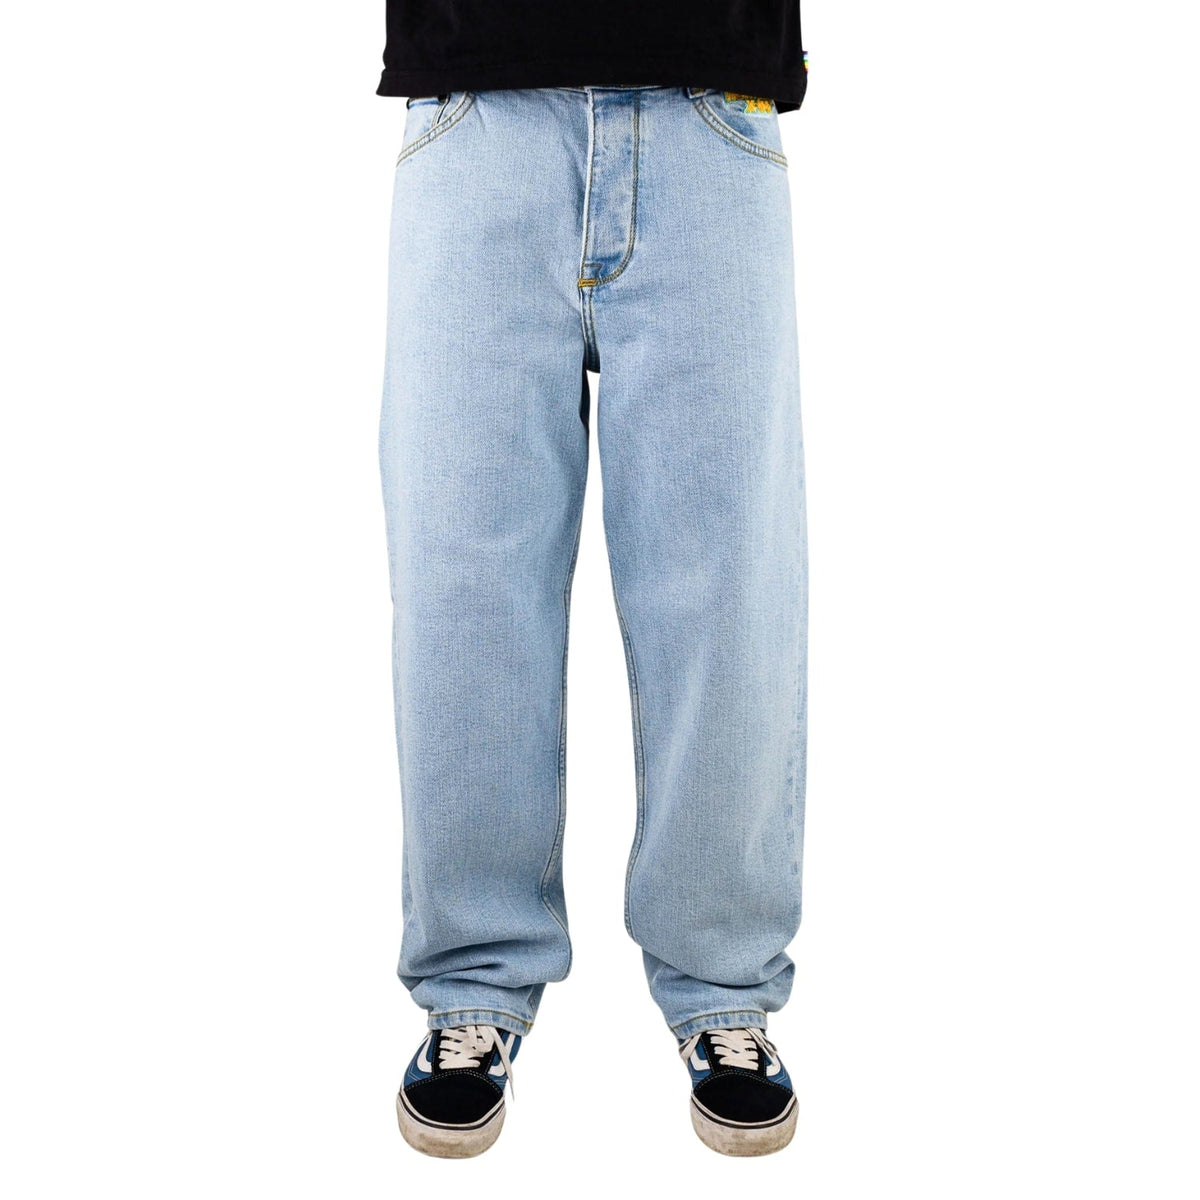 Home Boy X-Tra Baggy Denim - Moon - Mens Relaxed/Loose Denim Jeans by Home Boy